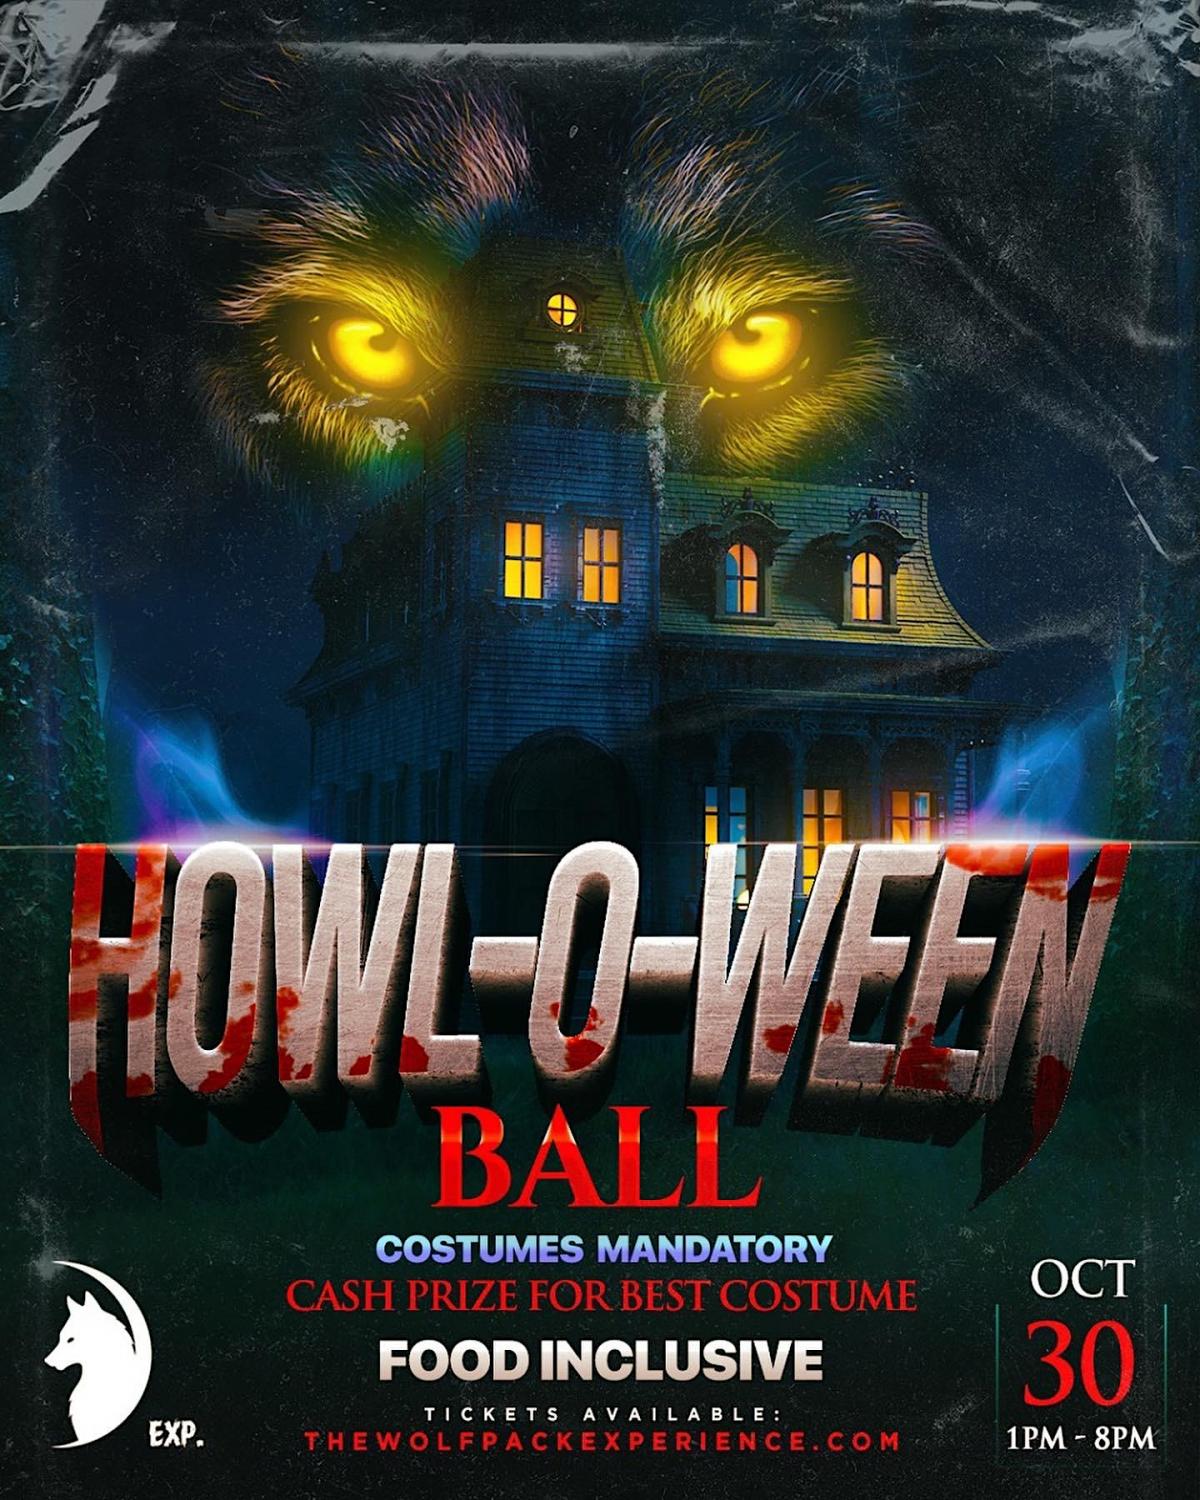 Howl-O-Ween Ball flyer or graphic.